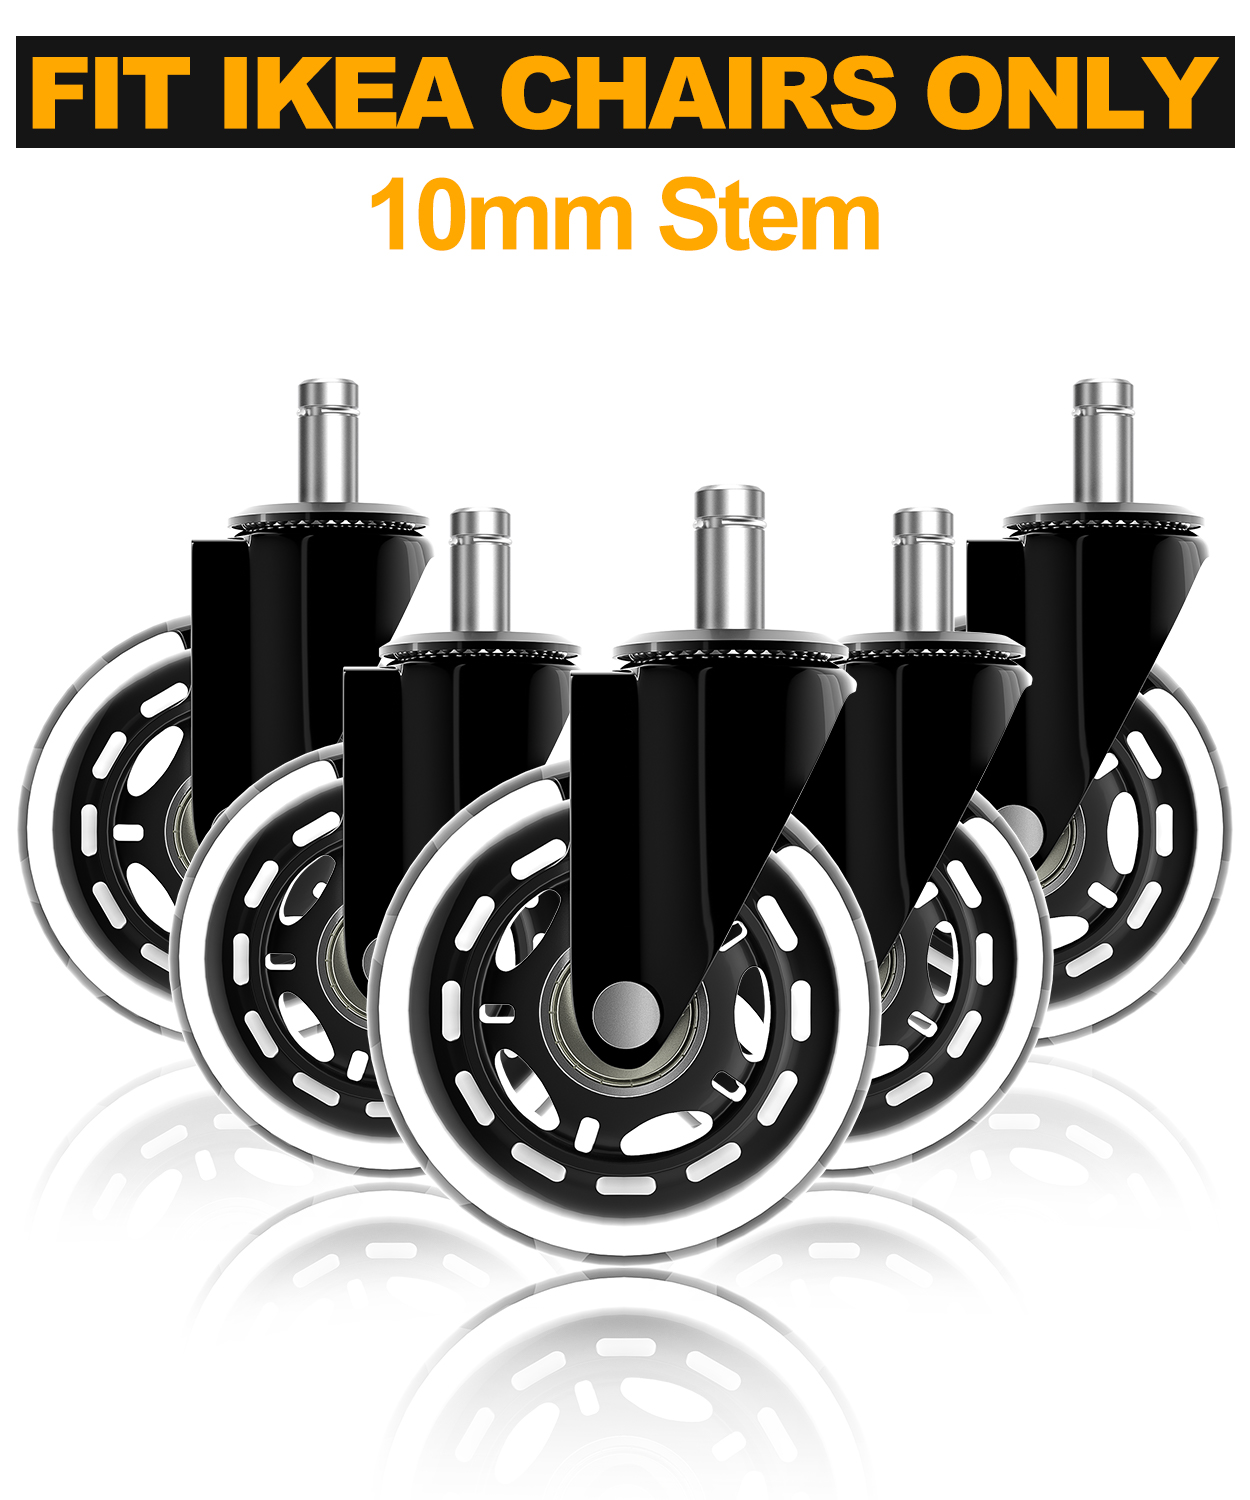 ENJOY Office Chair Replacement wheels Caster with 3/8" Stem Fit IKEA Chair 10mm 